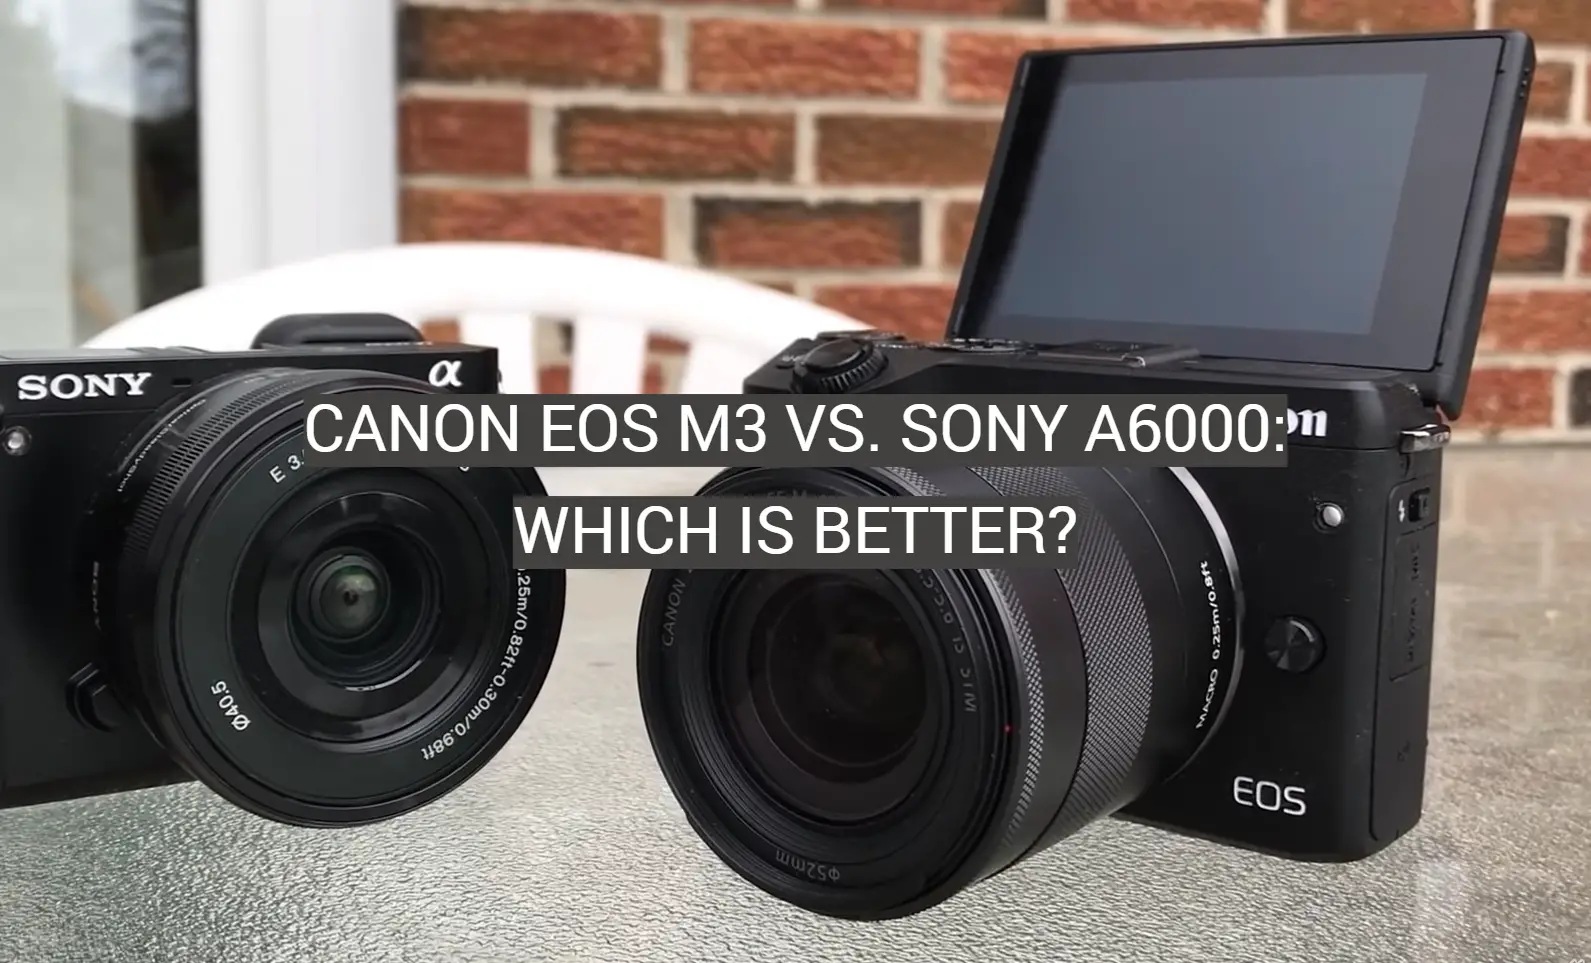 Canon EOS M3 vs. Sony a6000: Which is Better?